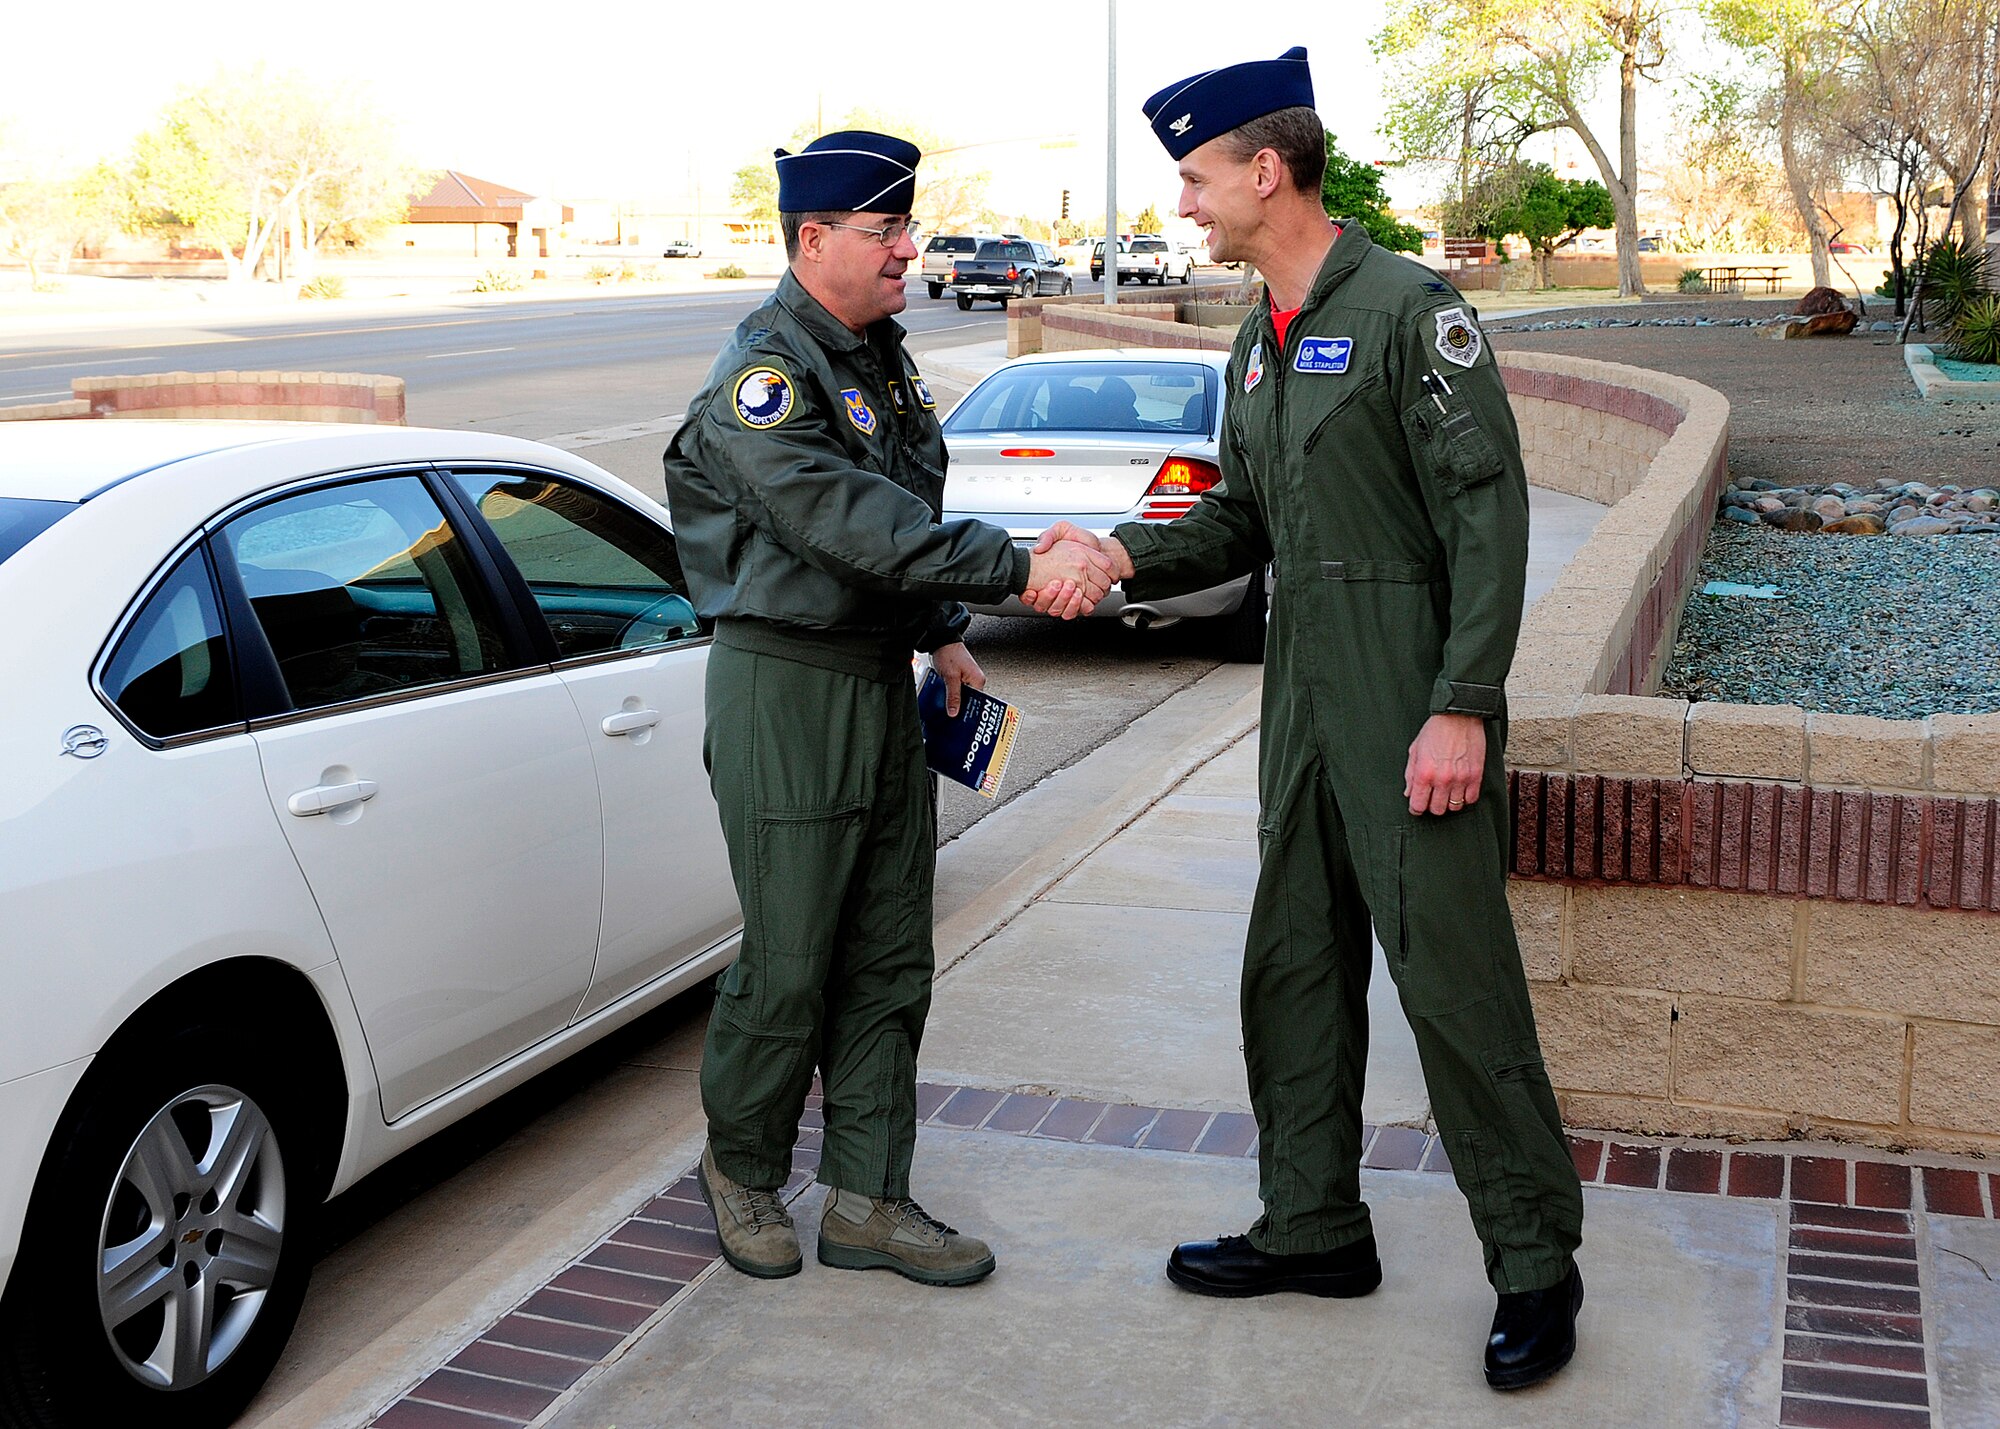 HOLOMAN AIR FORCE BASE, N.M. -- Lt. Gen. Marc Rogers, U.S. Air Force Inspector General, is greeted by Col. Mike Stapleton, 49th Operations Group commander, March 26, 2010, during his tour of the base. The Inspector General reports to the Secretary and Chief of Staff of the Air Force on matters concerning Air Force effectiveness, efficiency and the military discipline of active duty, Air Force Reserve and Air National Guard forces. (U.S. Air Force photo by Senior Airman DeAndre Curtiss)(Released) 